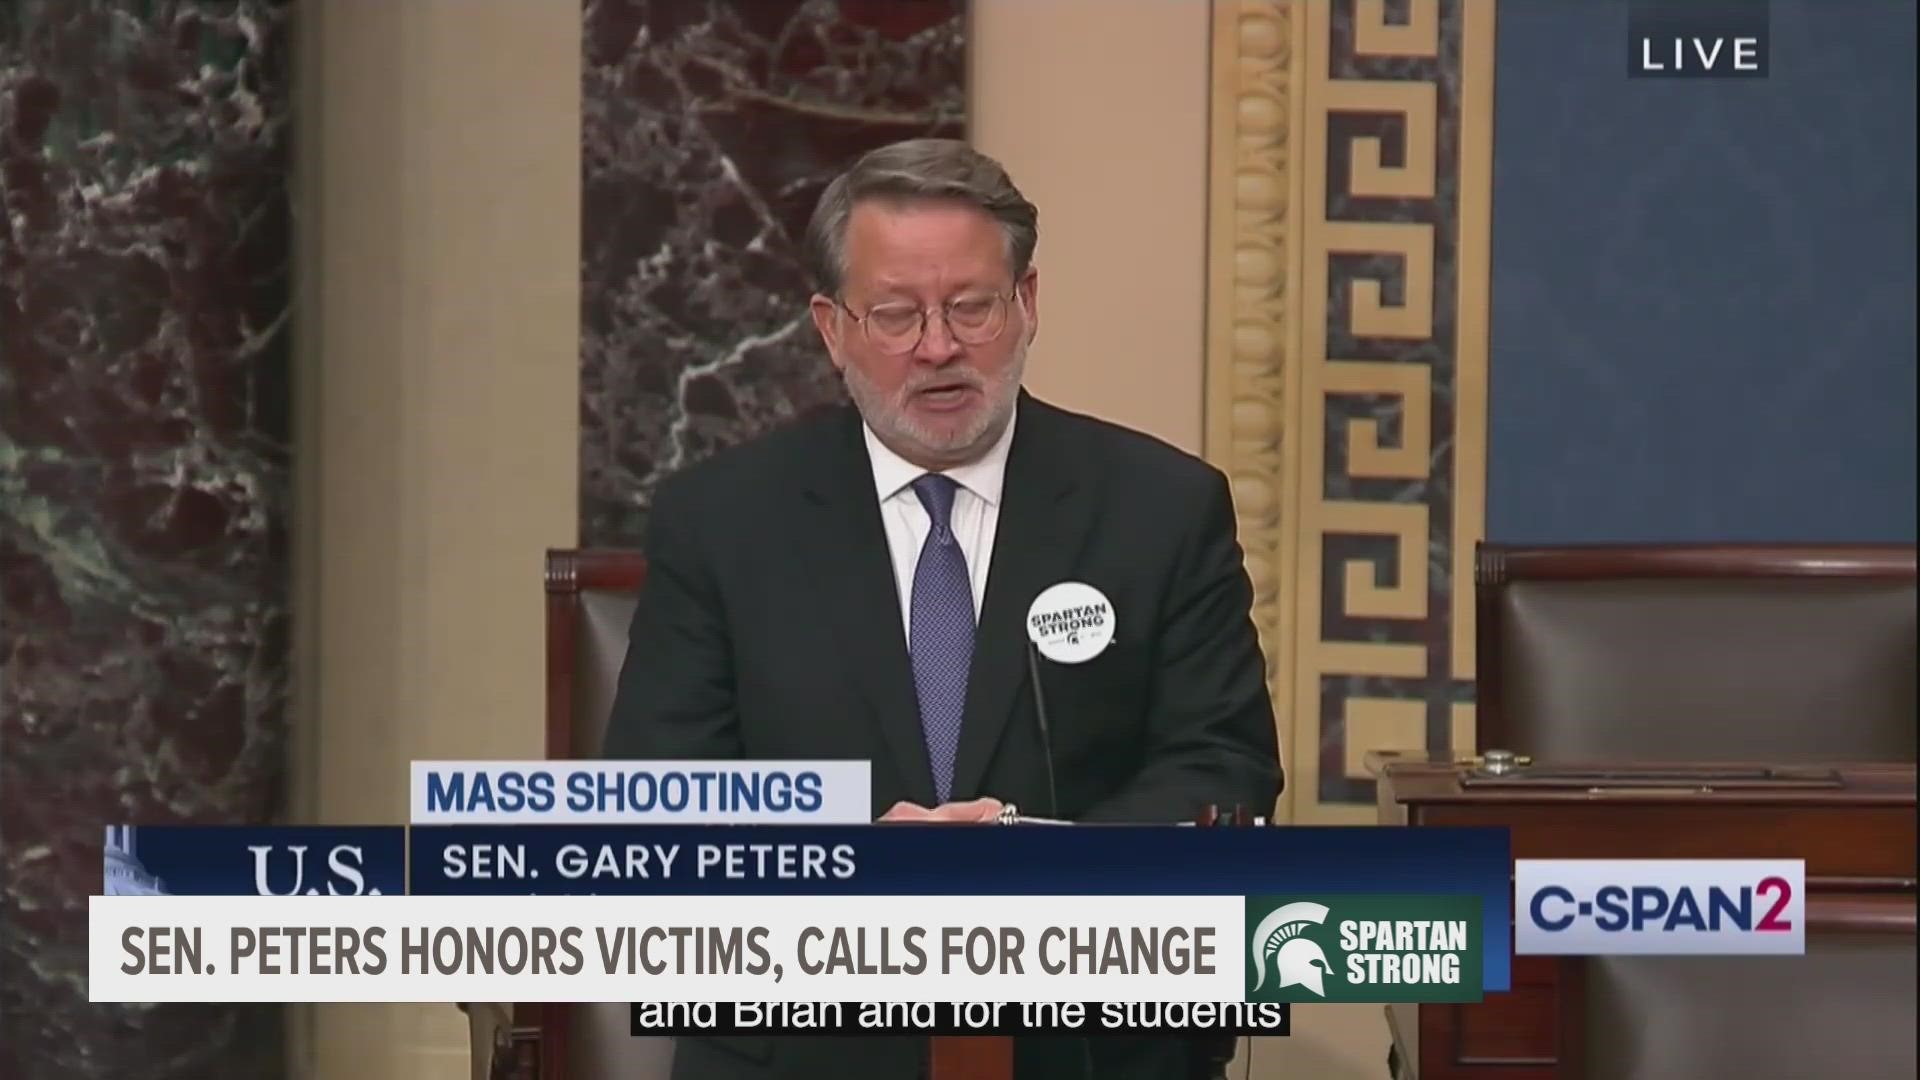 Sen. Peters used his time to pay tribute to the victims in the shooting, and call on Congress to use their power for real gun legislation.